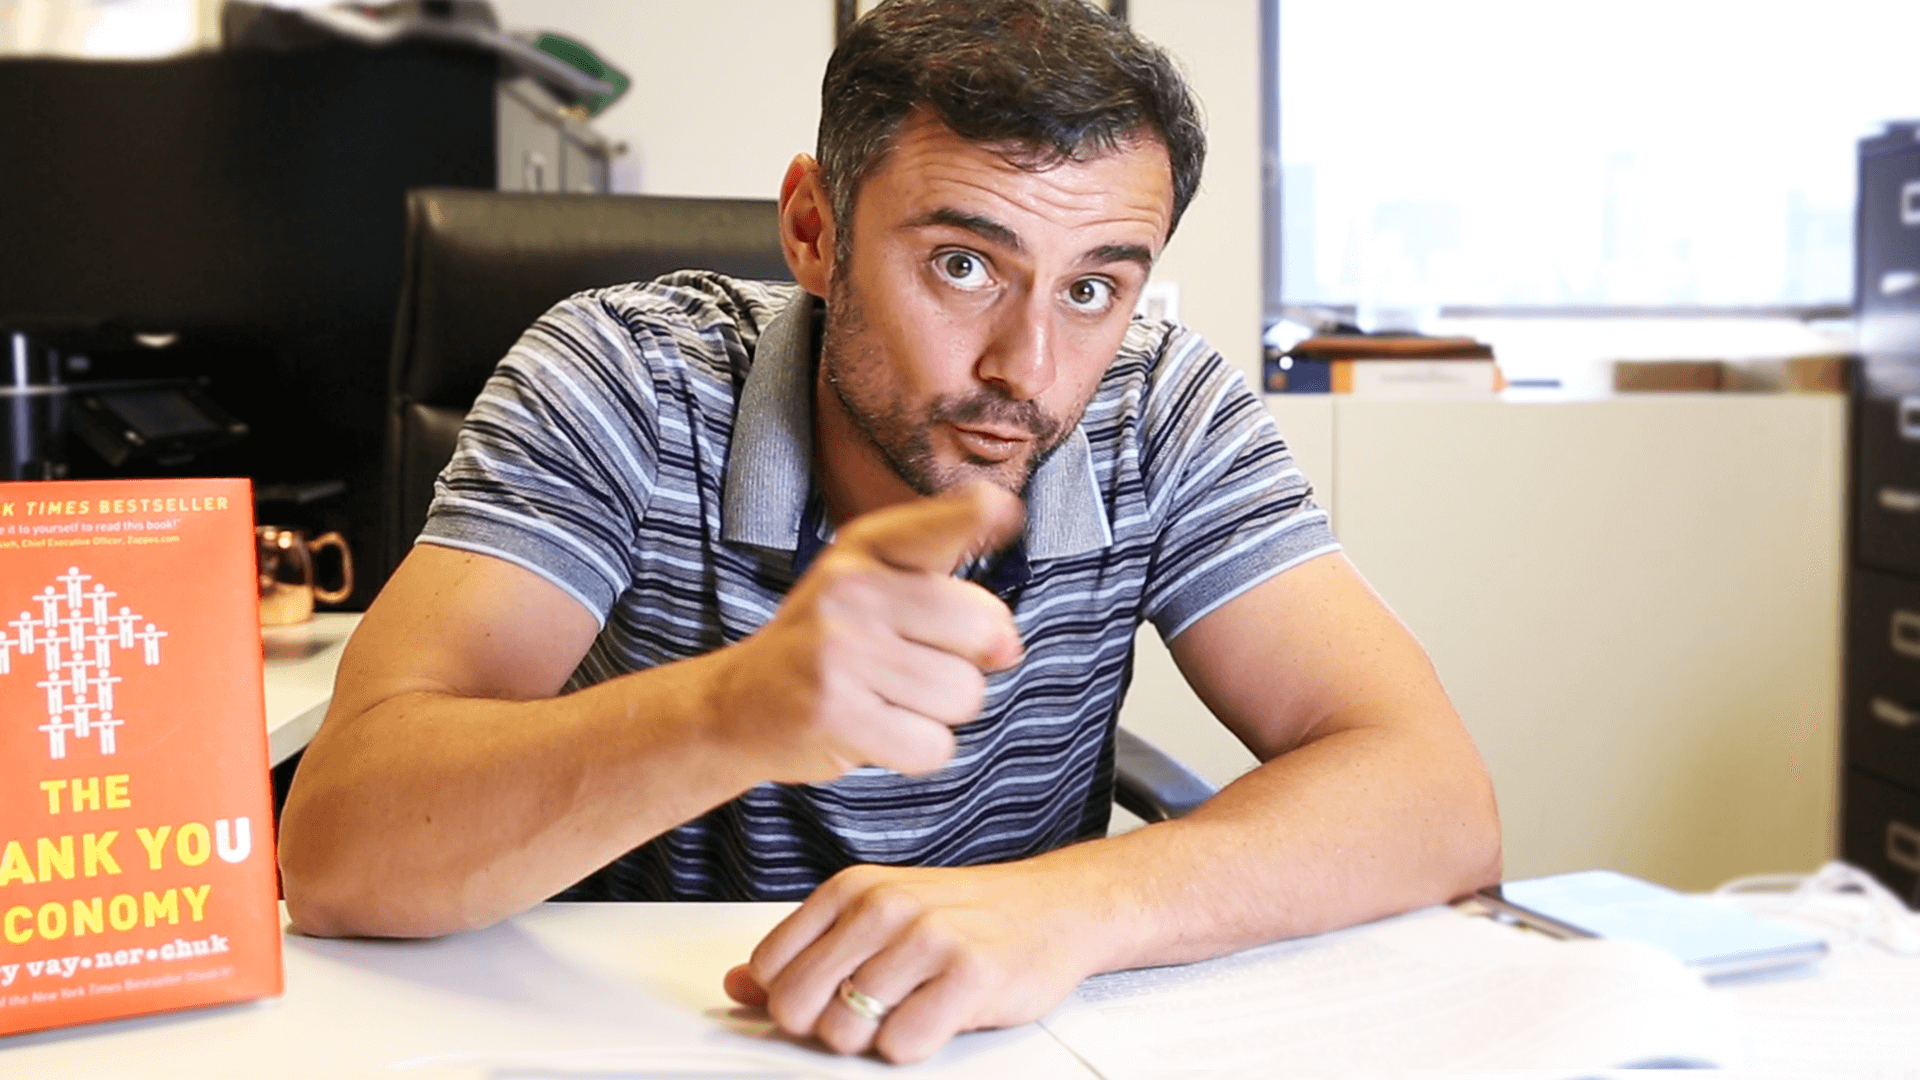 #AskGaryVee Episode 123: How Creatives Can Start Thinking Like an Entrepreneur